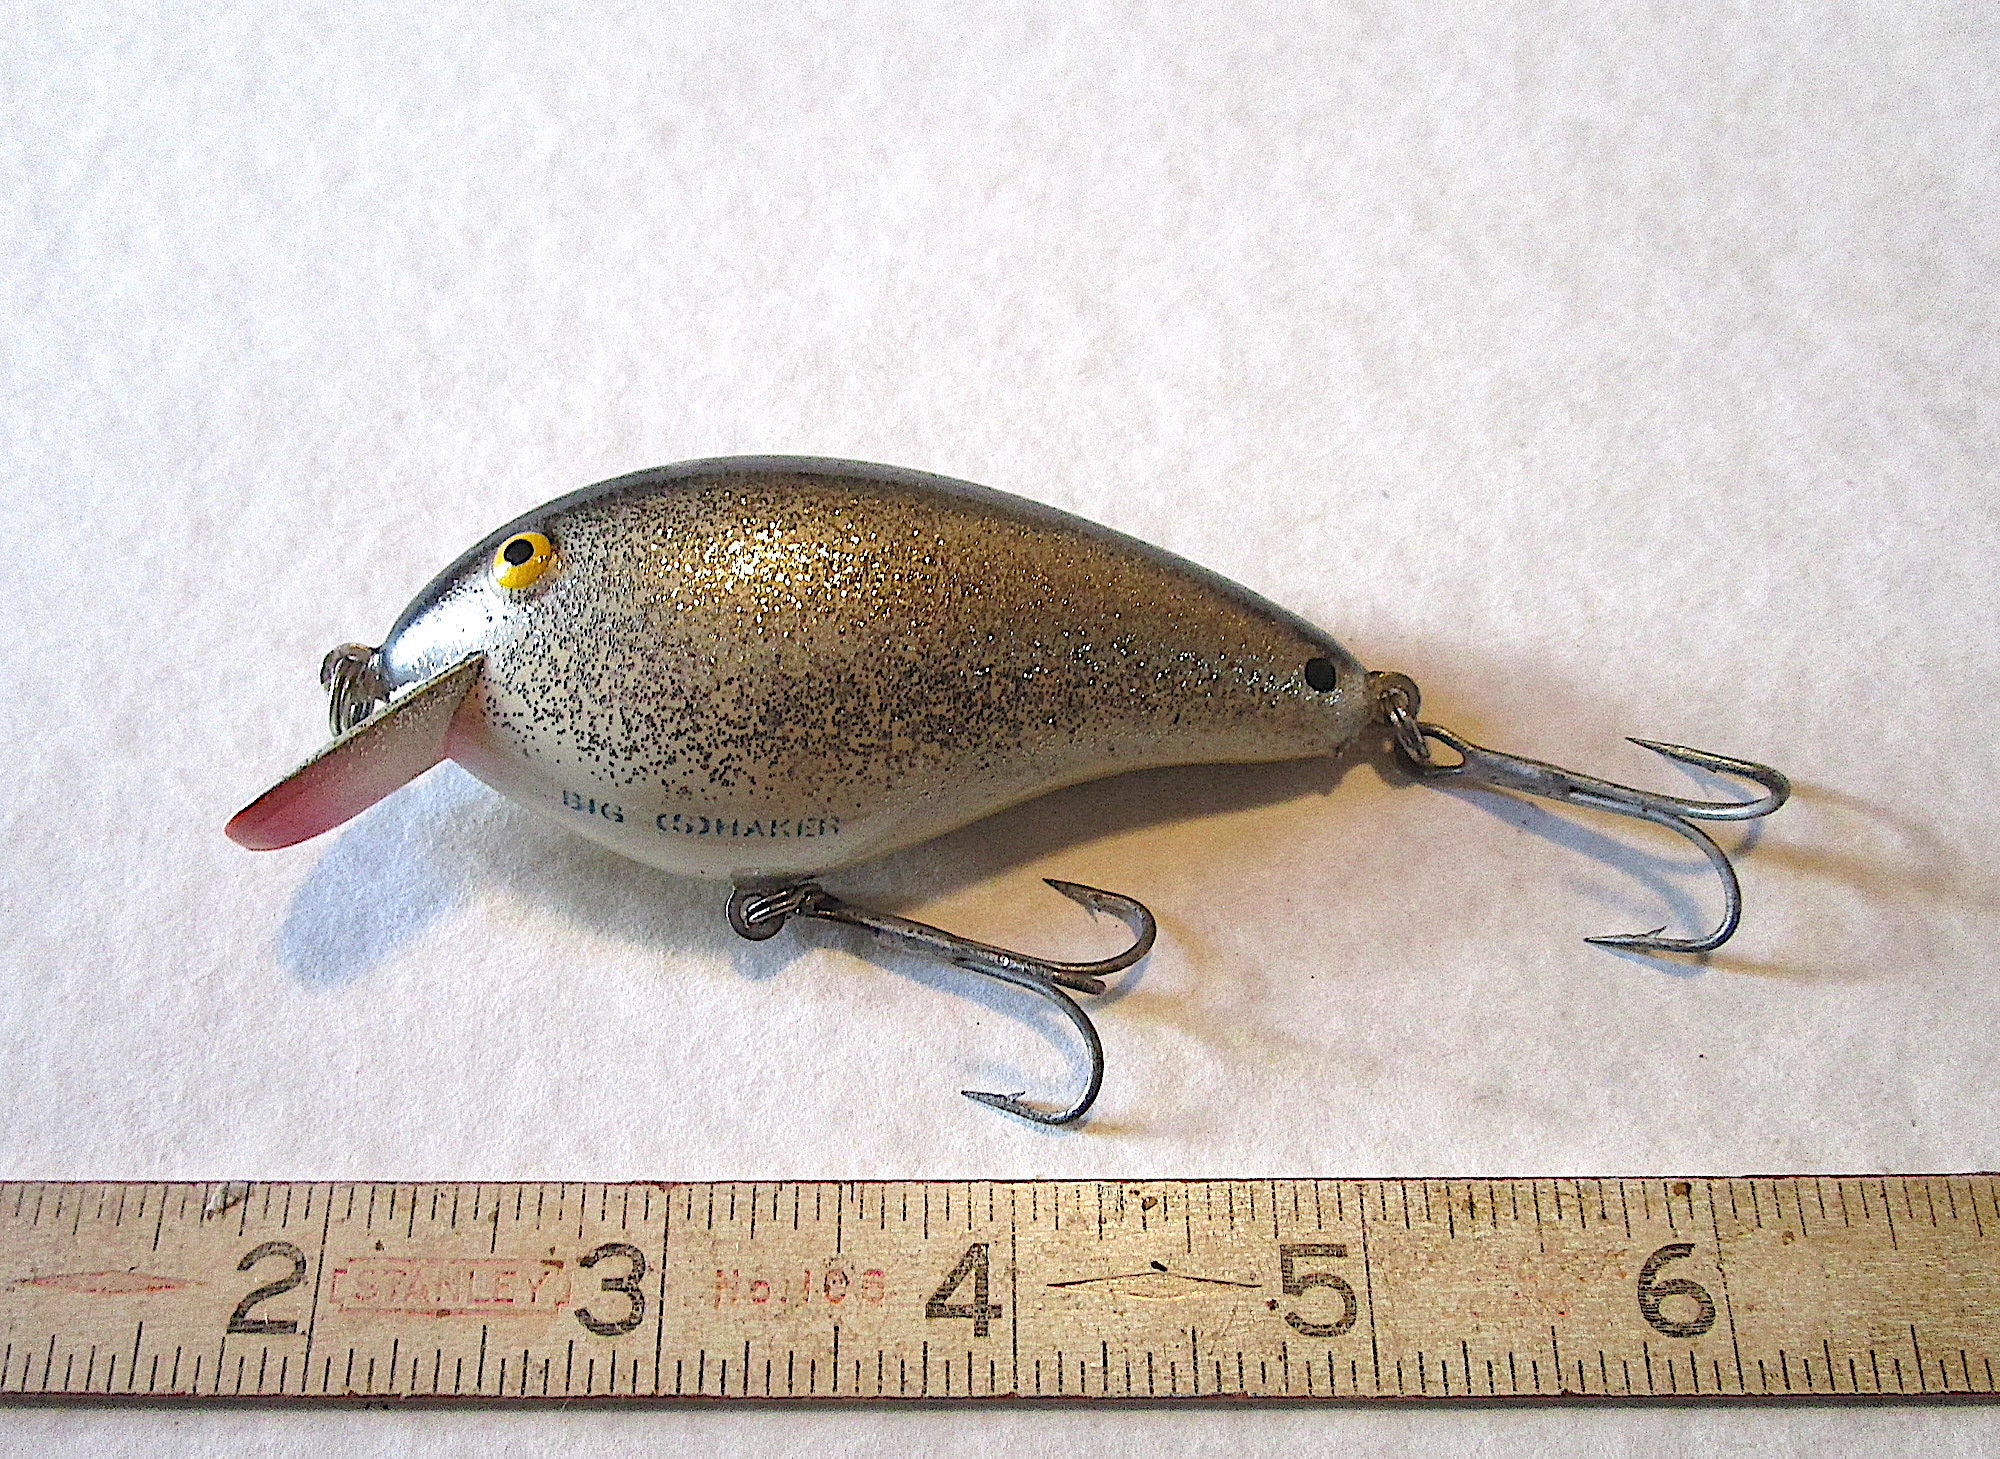 TU78 big shaker Lure by Shakespeare Vintage Old Fishing Tackle Another One  of Which I Can't Say I've Seen Many 